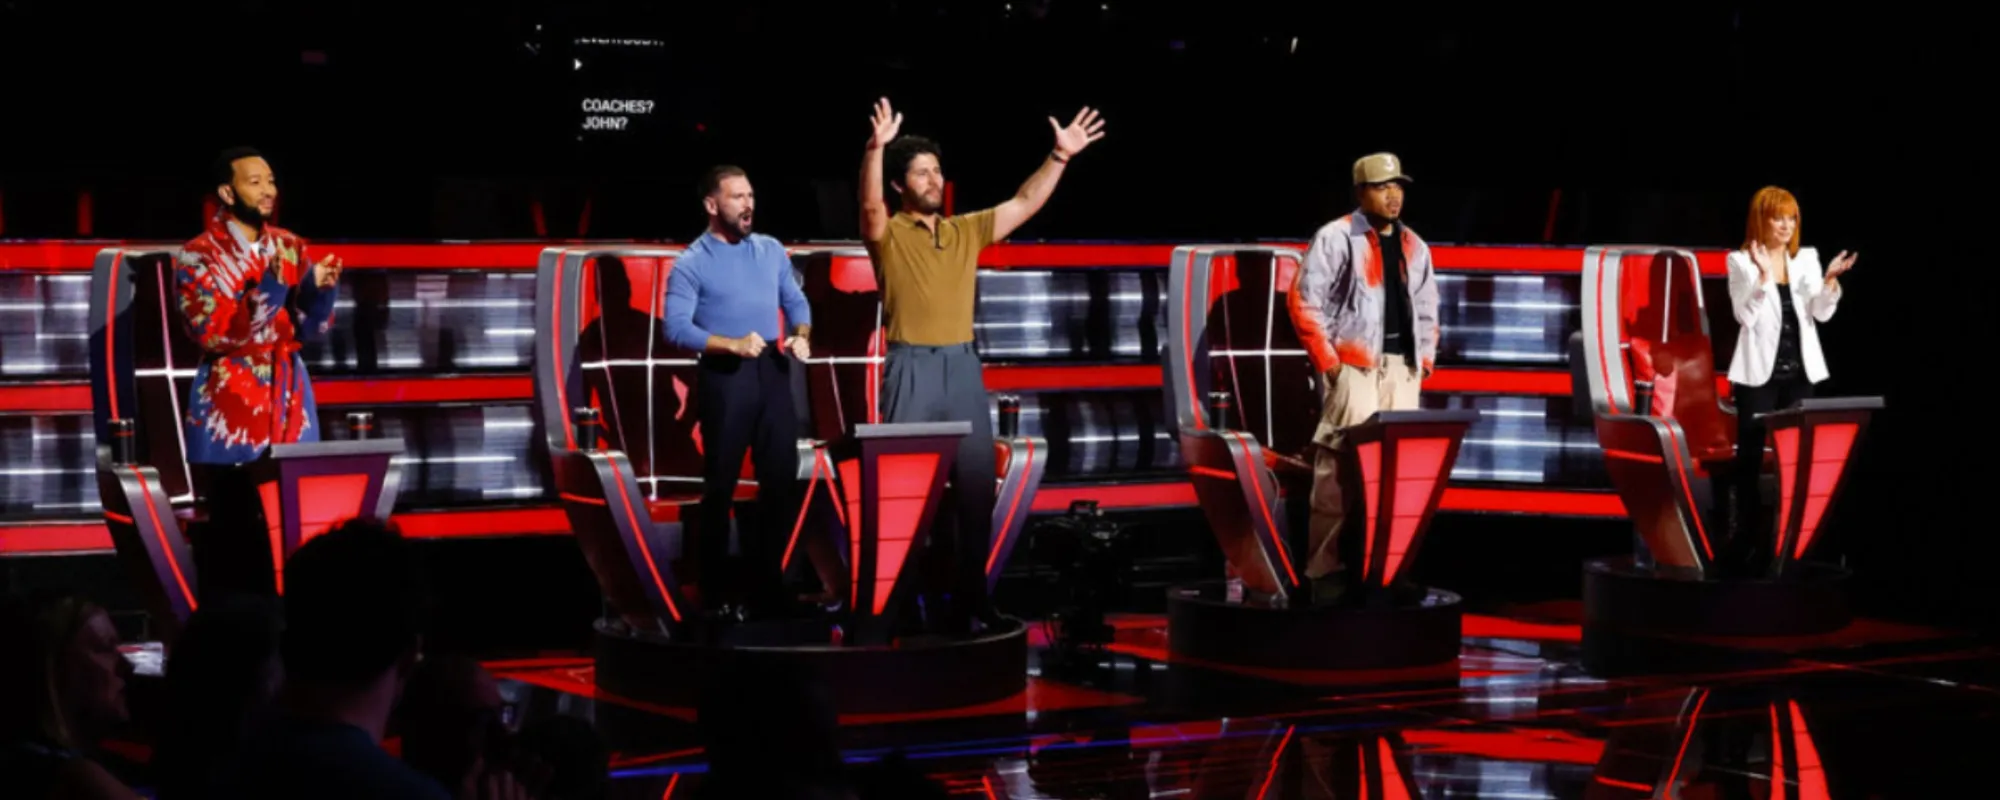 Why Isn’t ‘The Voice’ on Tonight? When Does the Next New Episode Air?